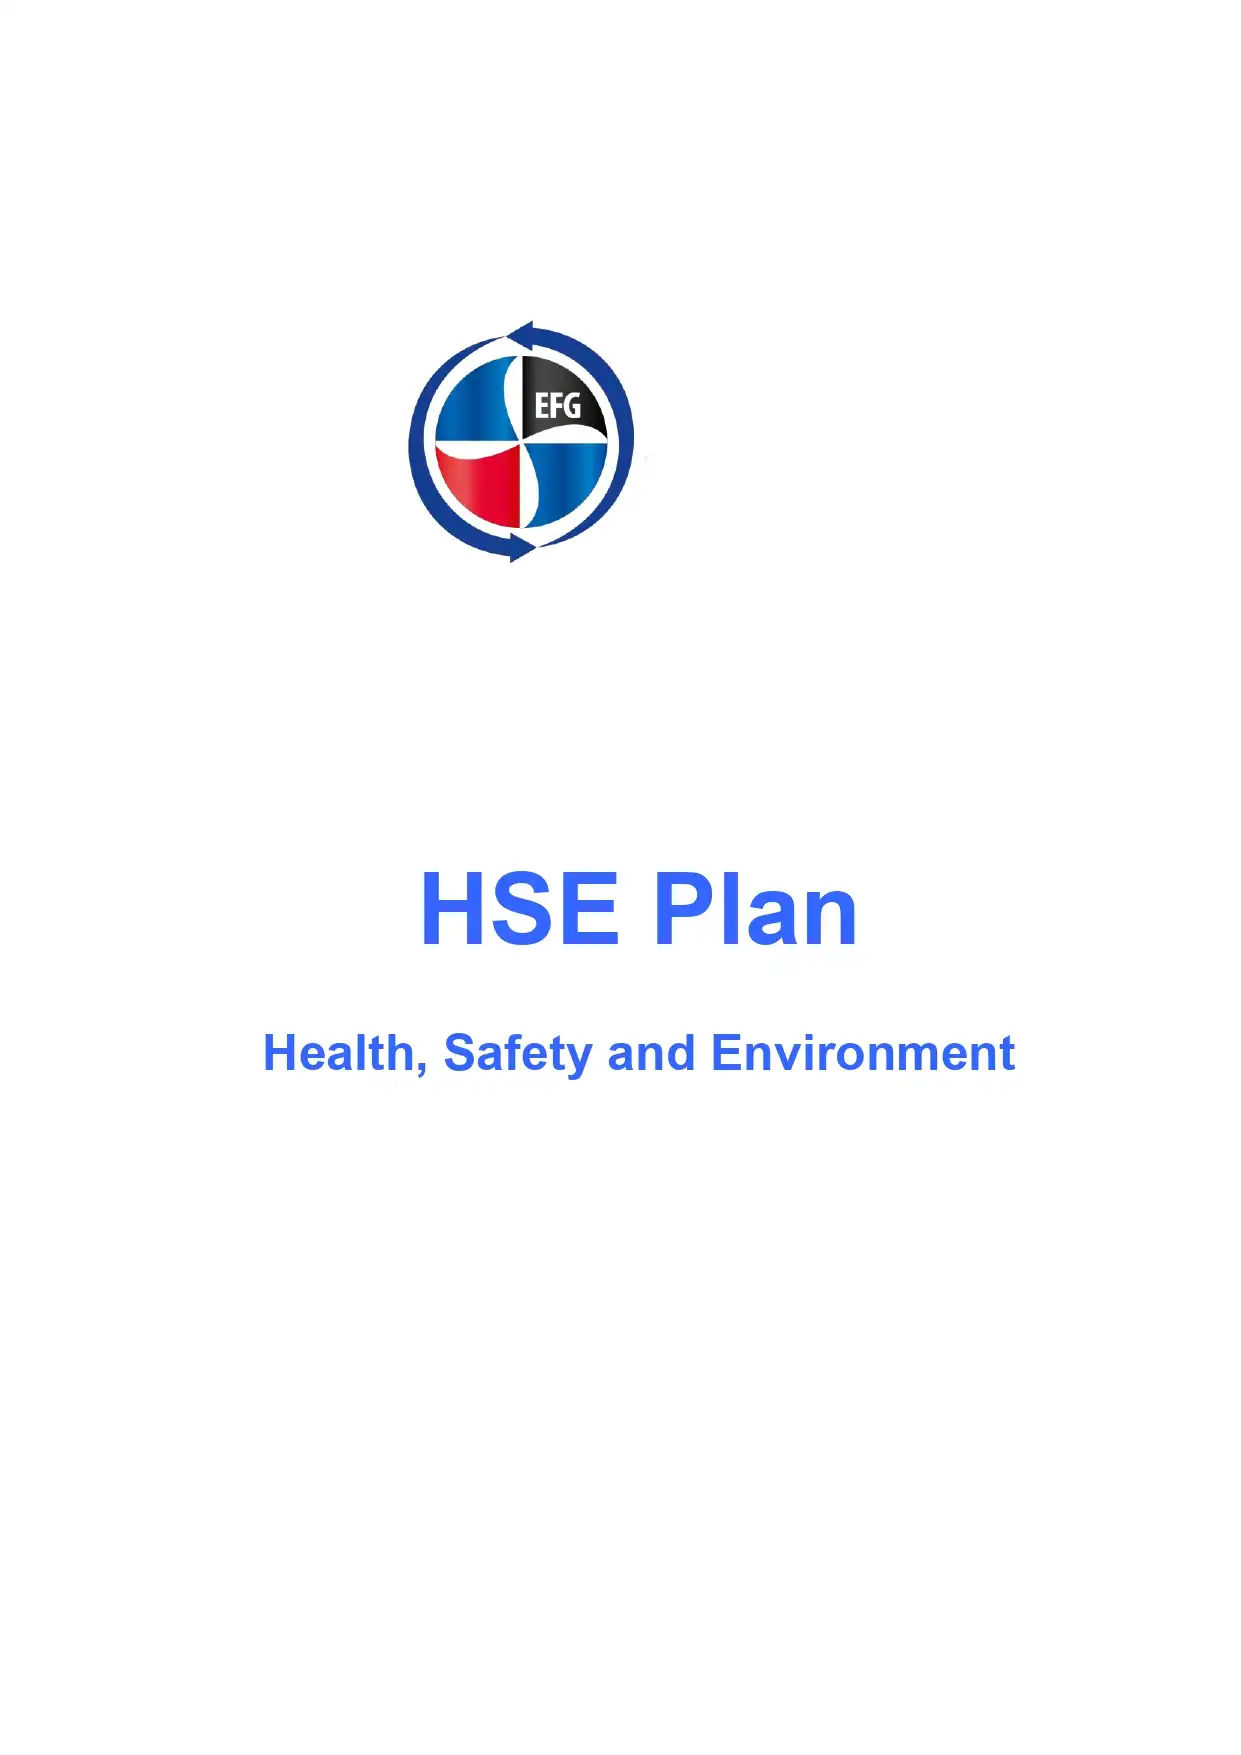 HSE Plan Health, Safety and Environment